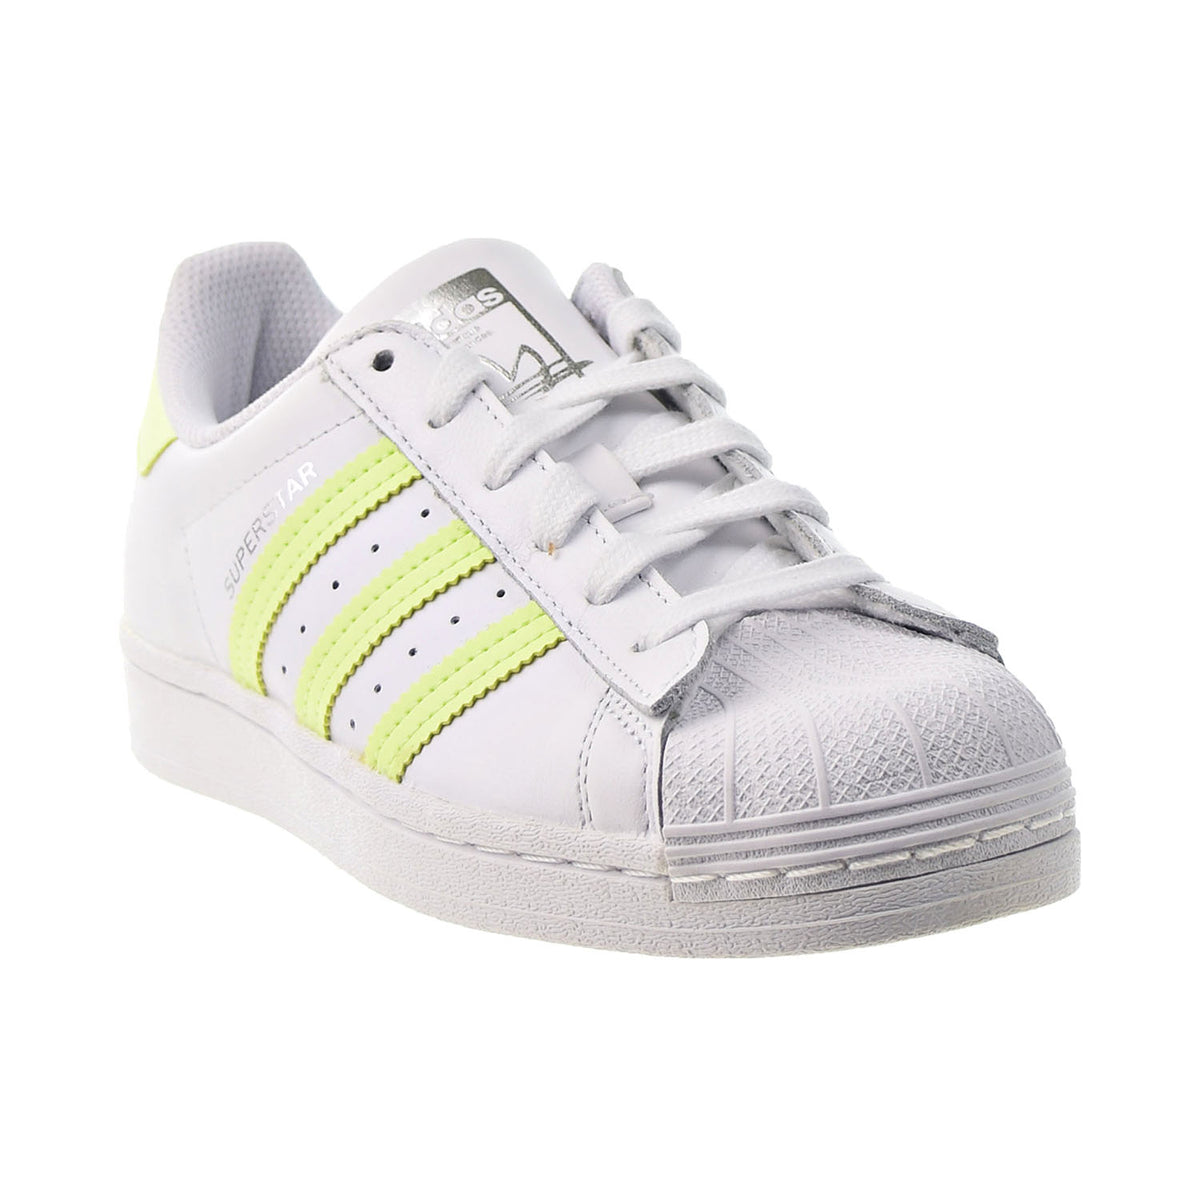 Adidas Women's Shoes Res Silver